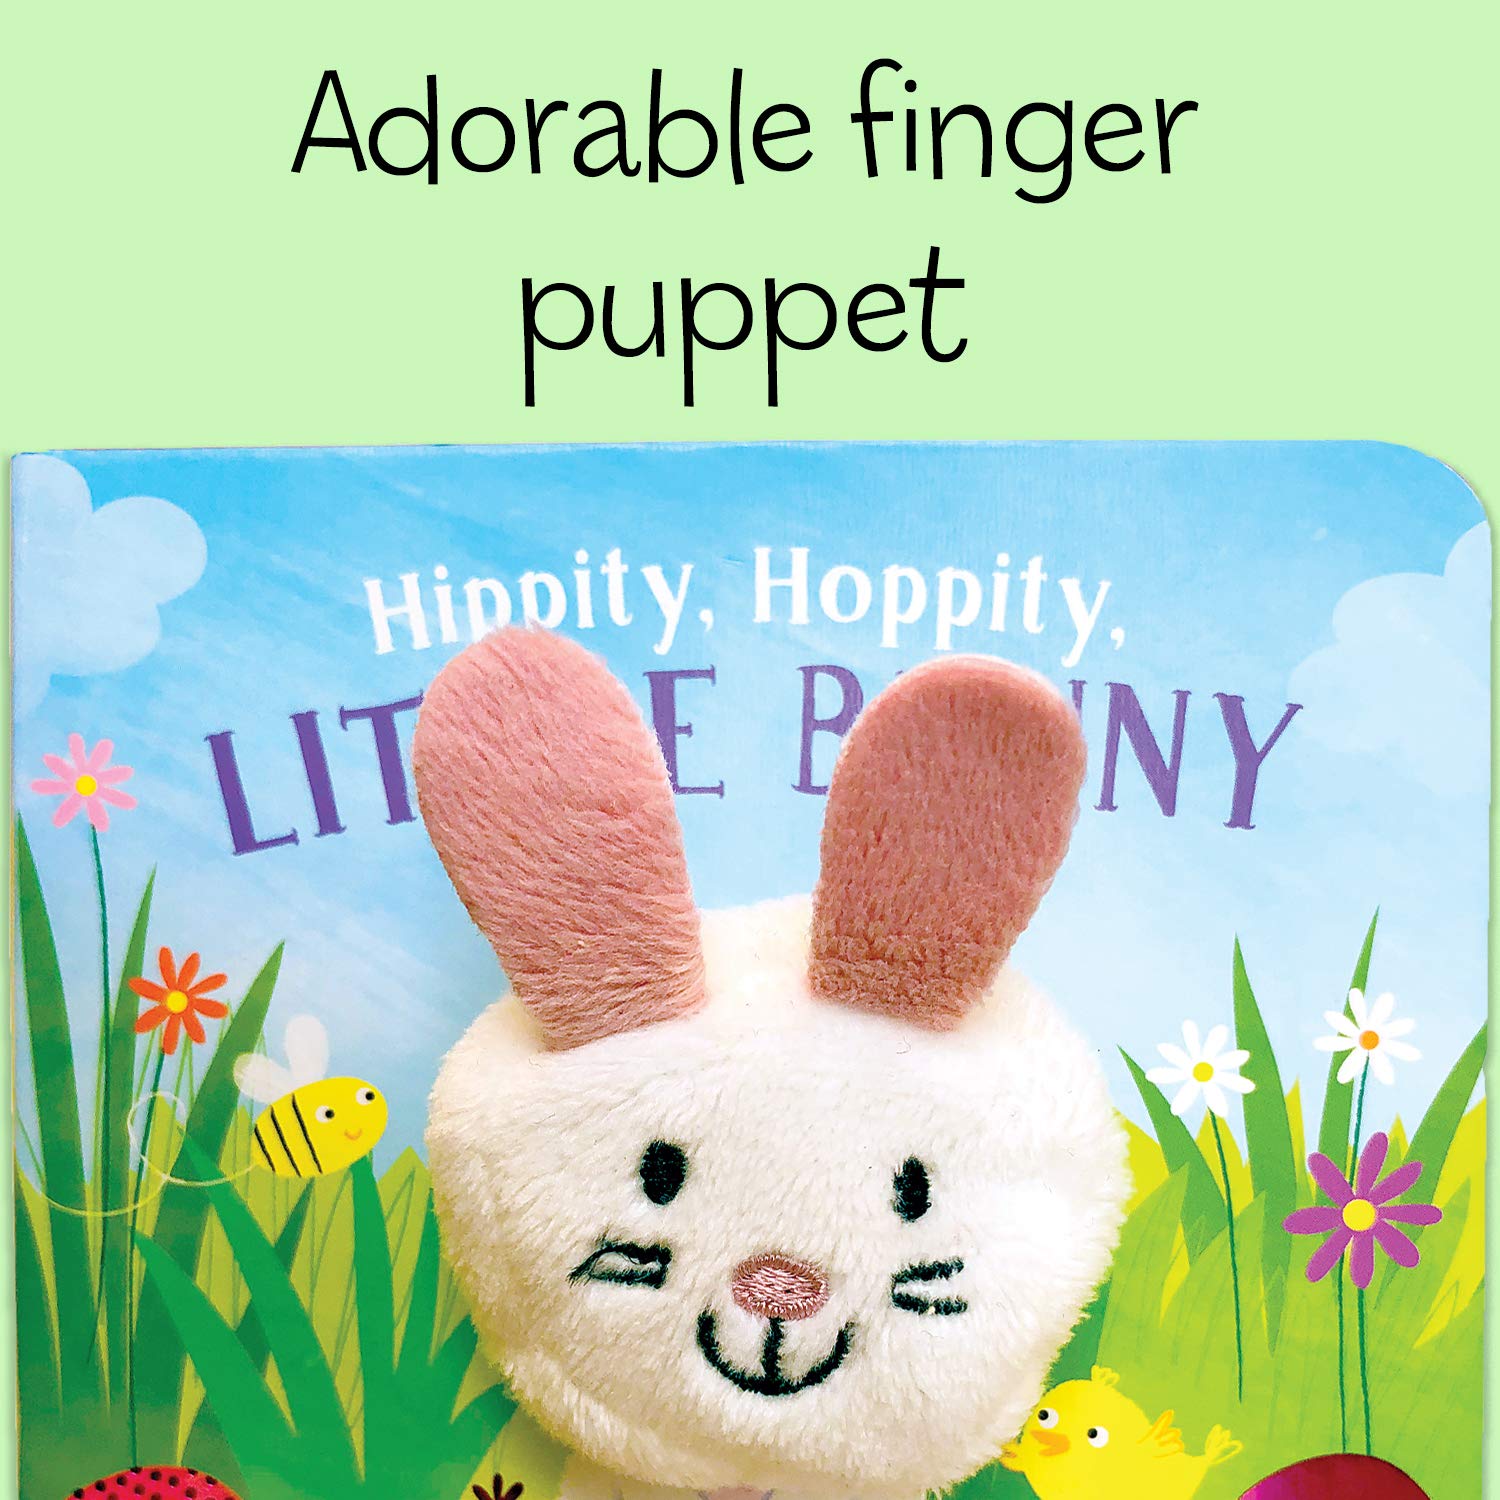 Hippity, Hoppity, Little Bunny - Finger Puppet Board Book for Easter Basket Gifts or Stuffer Ages 0-3